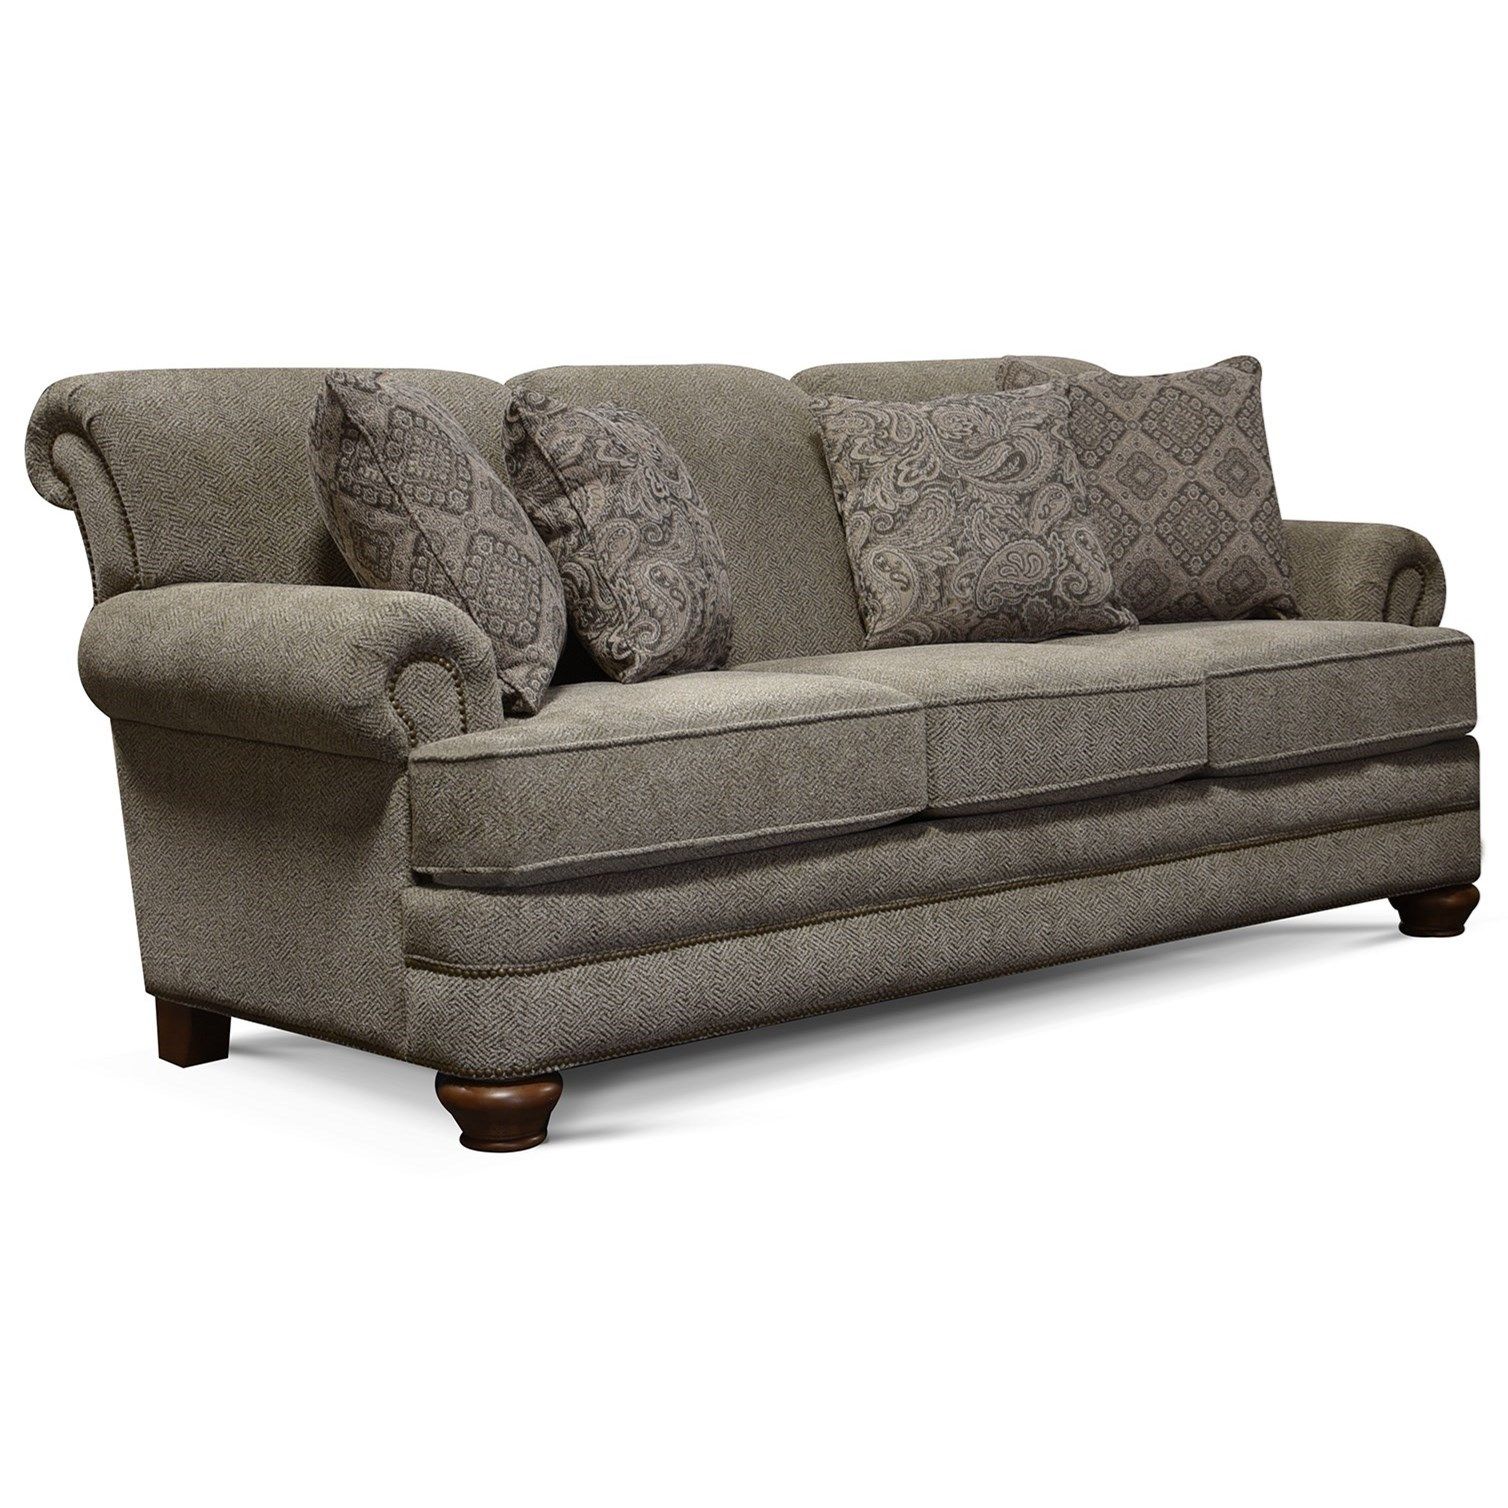 England 5q00/n Series Traditional Sofa With Nailhead Trim | Superstore |  Uph – Stationary Sofas Throughout Sofas With Nailhead Trim (View 5 of 15)